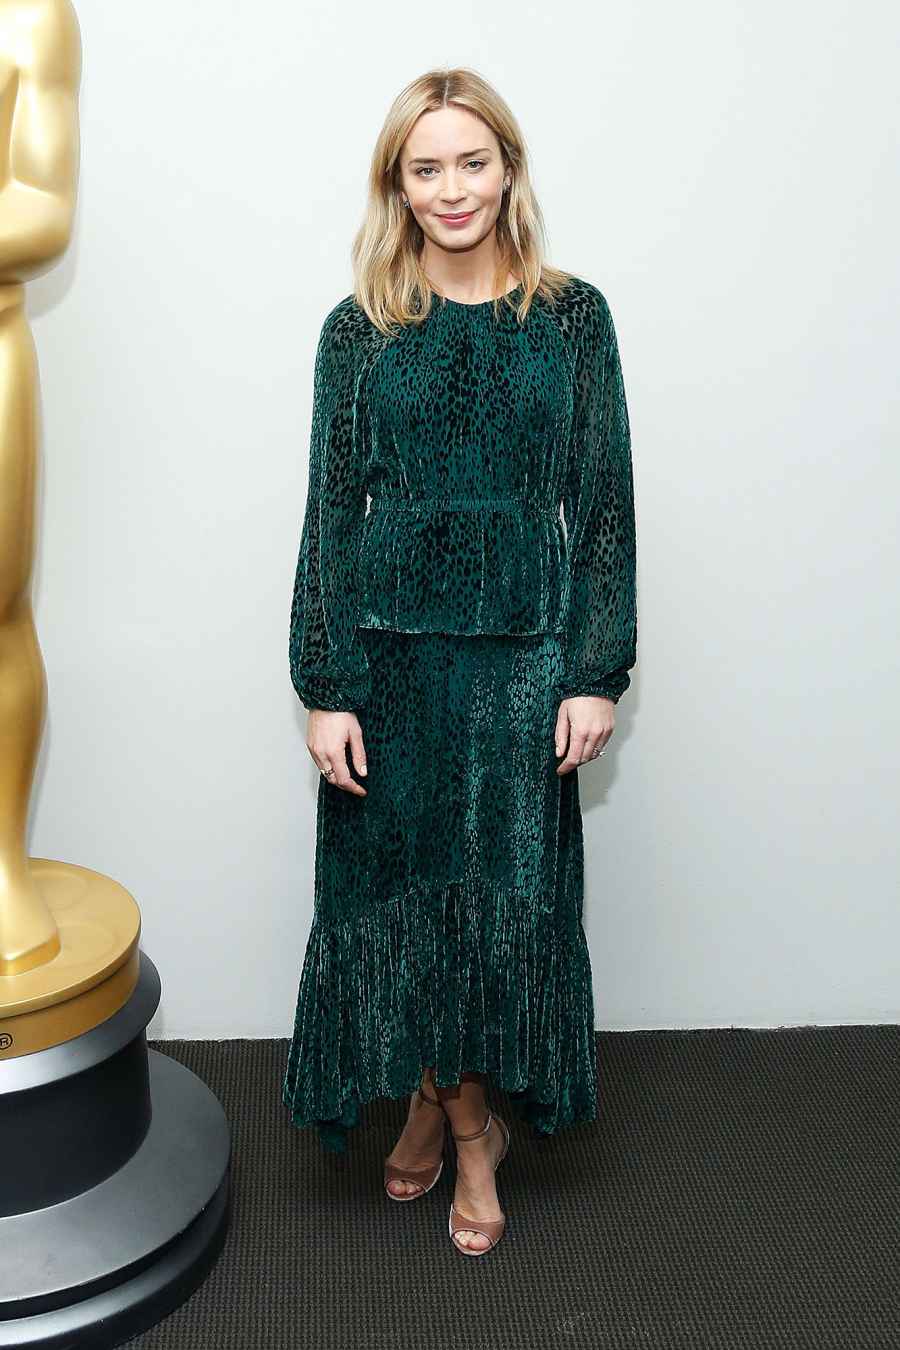 Actor Emily Blunt attends The Academy of Motion Pictures Arts and Sciences